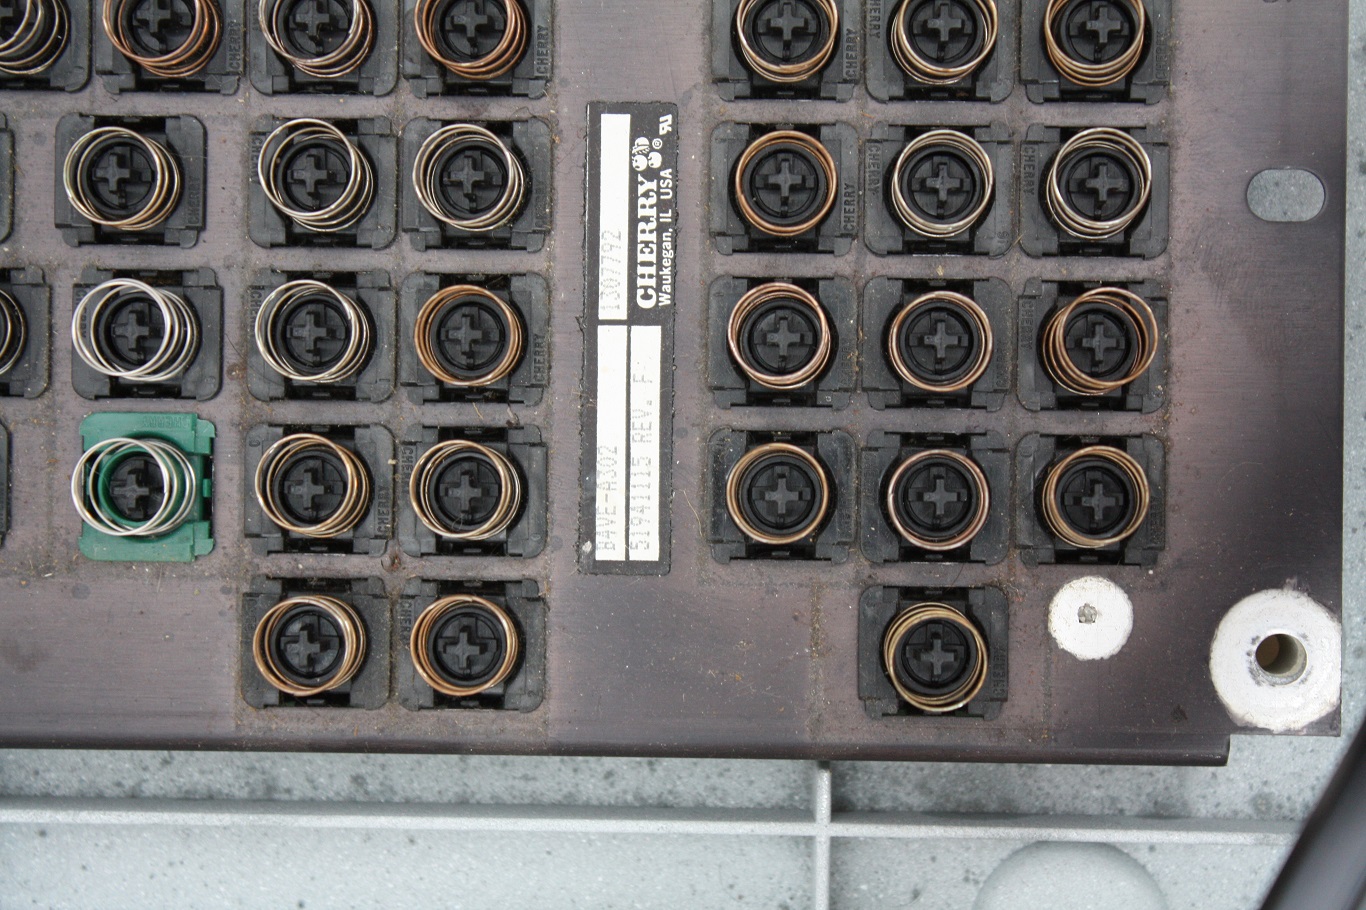 Cherry Terminal Keyboard - solid state capacitive switches